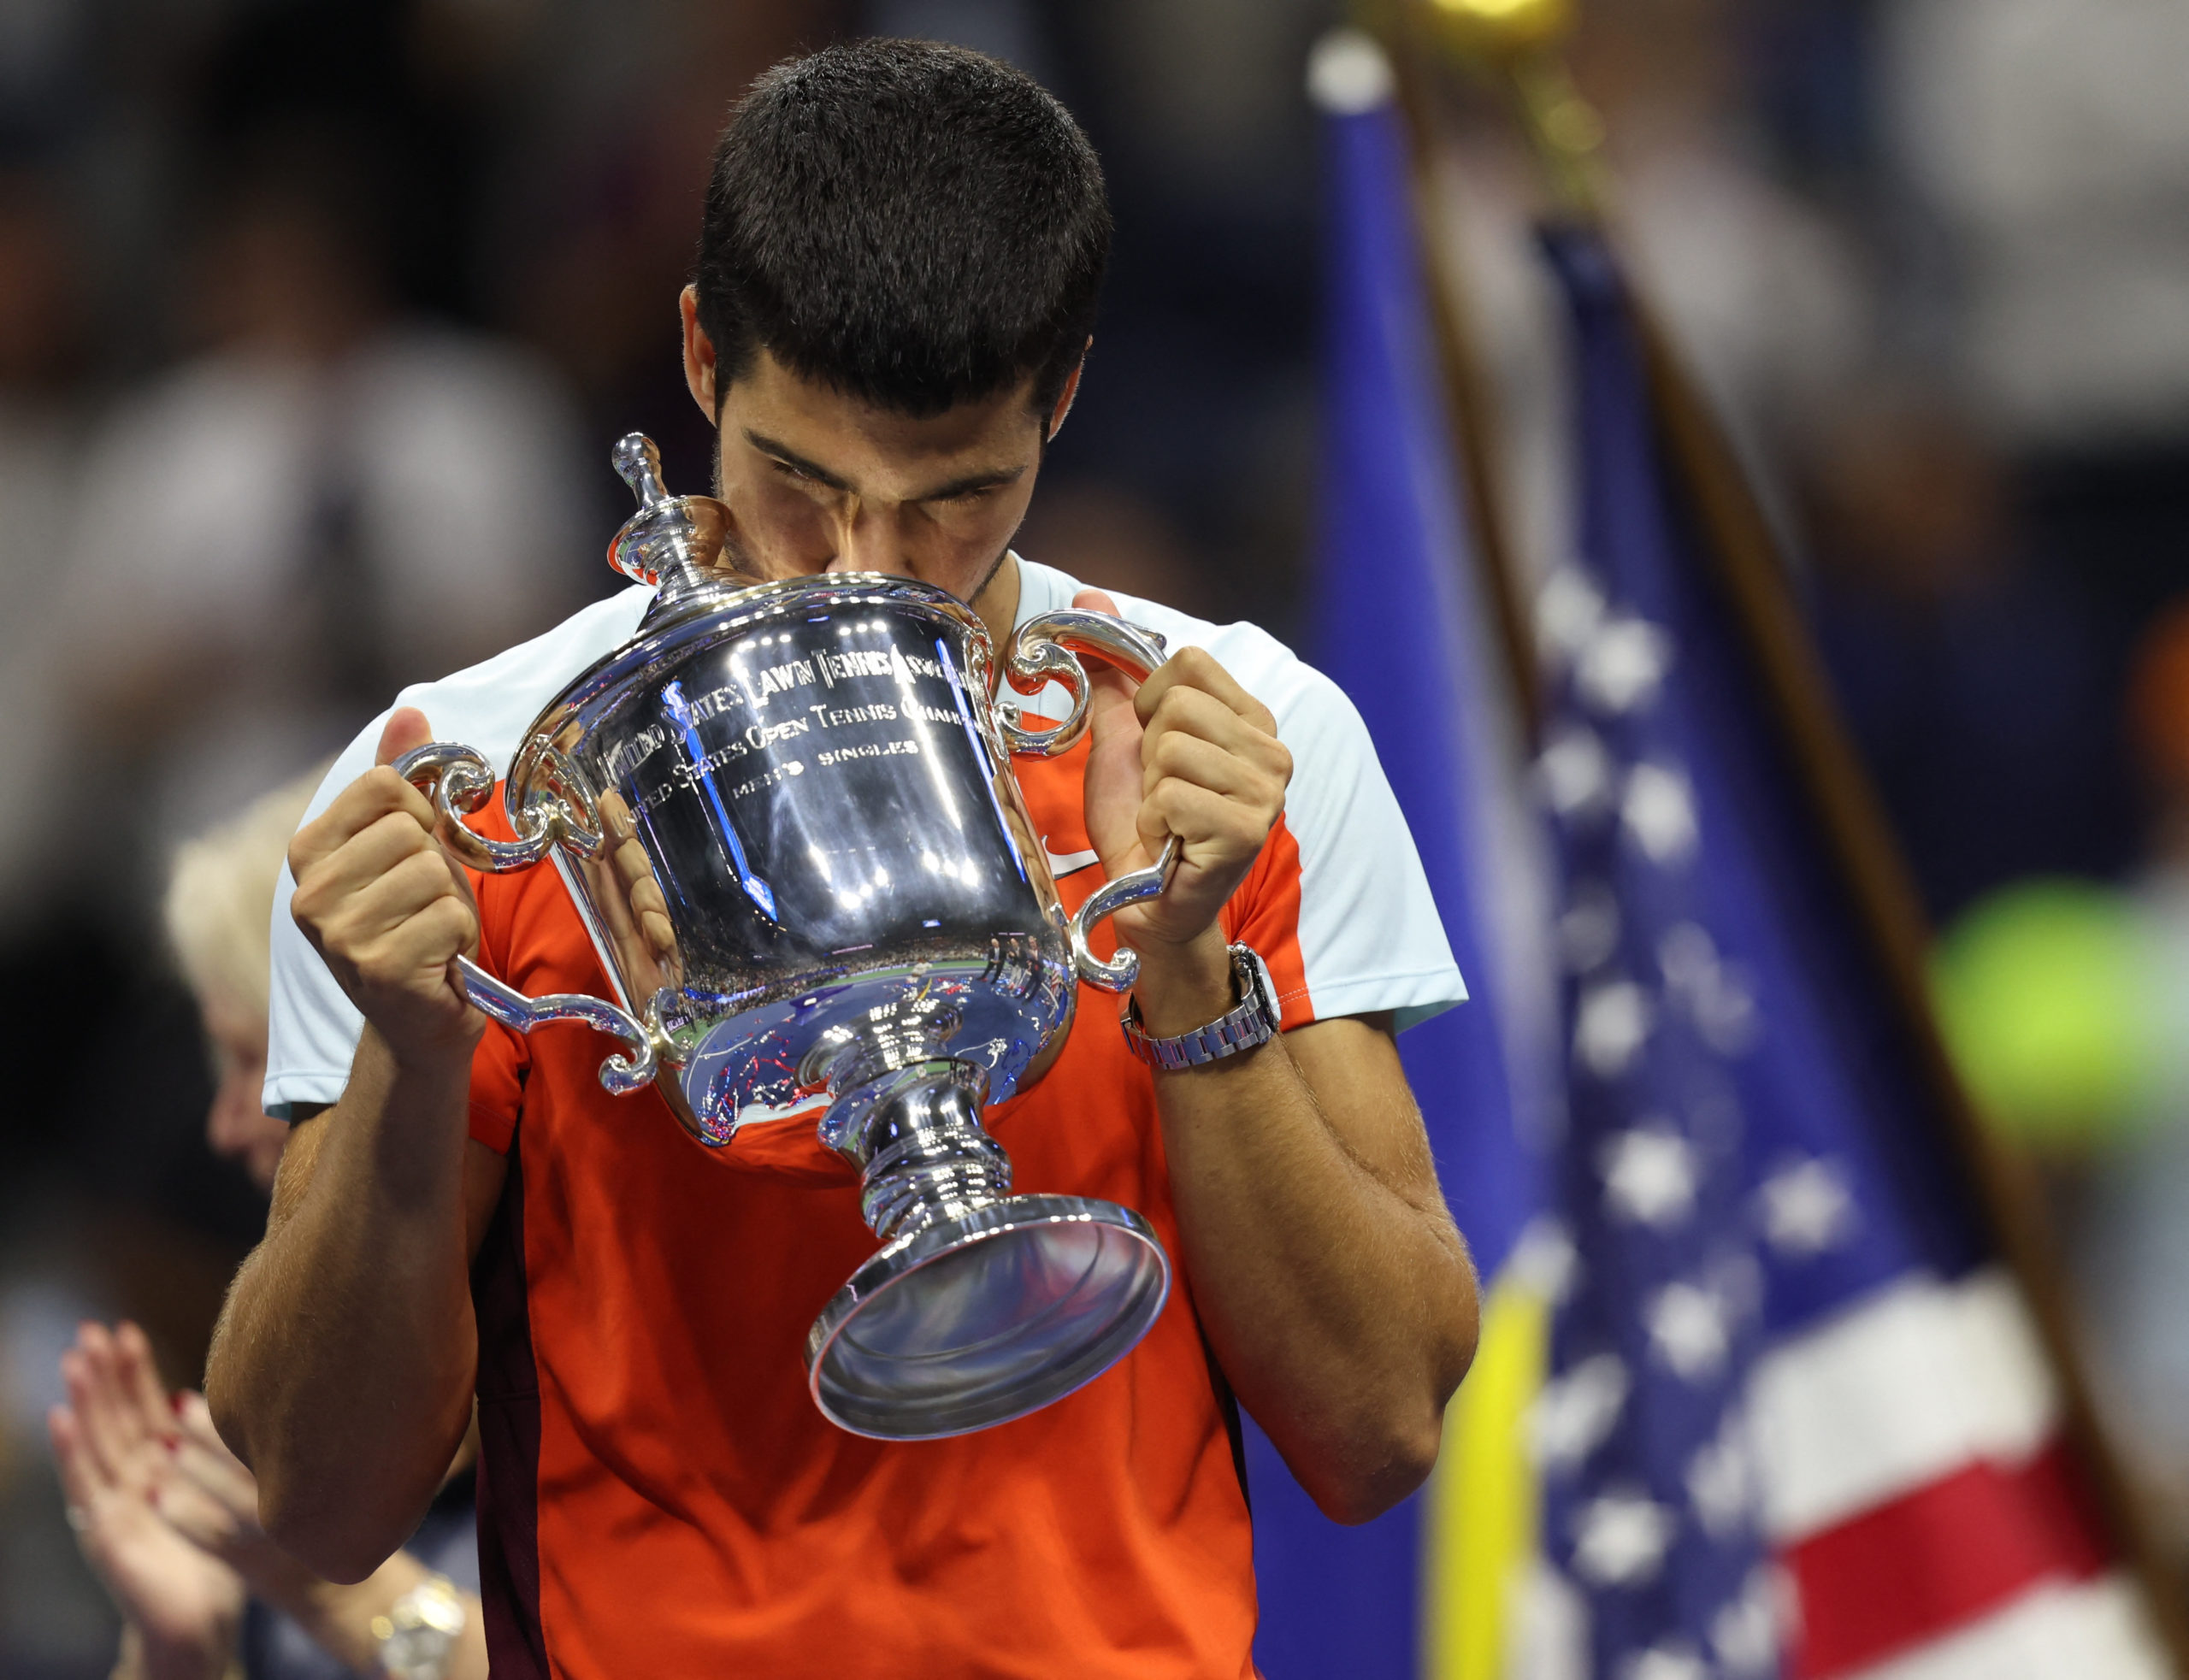 Tennis - U.S. Open - Flushing Meadows, New York, United States - September 11, 2022  Spain's Carlos Alcaraz celebrates with the trophy after winning the U.S. Open 